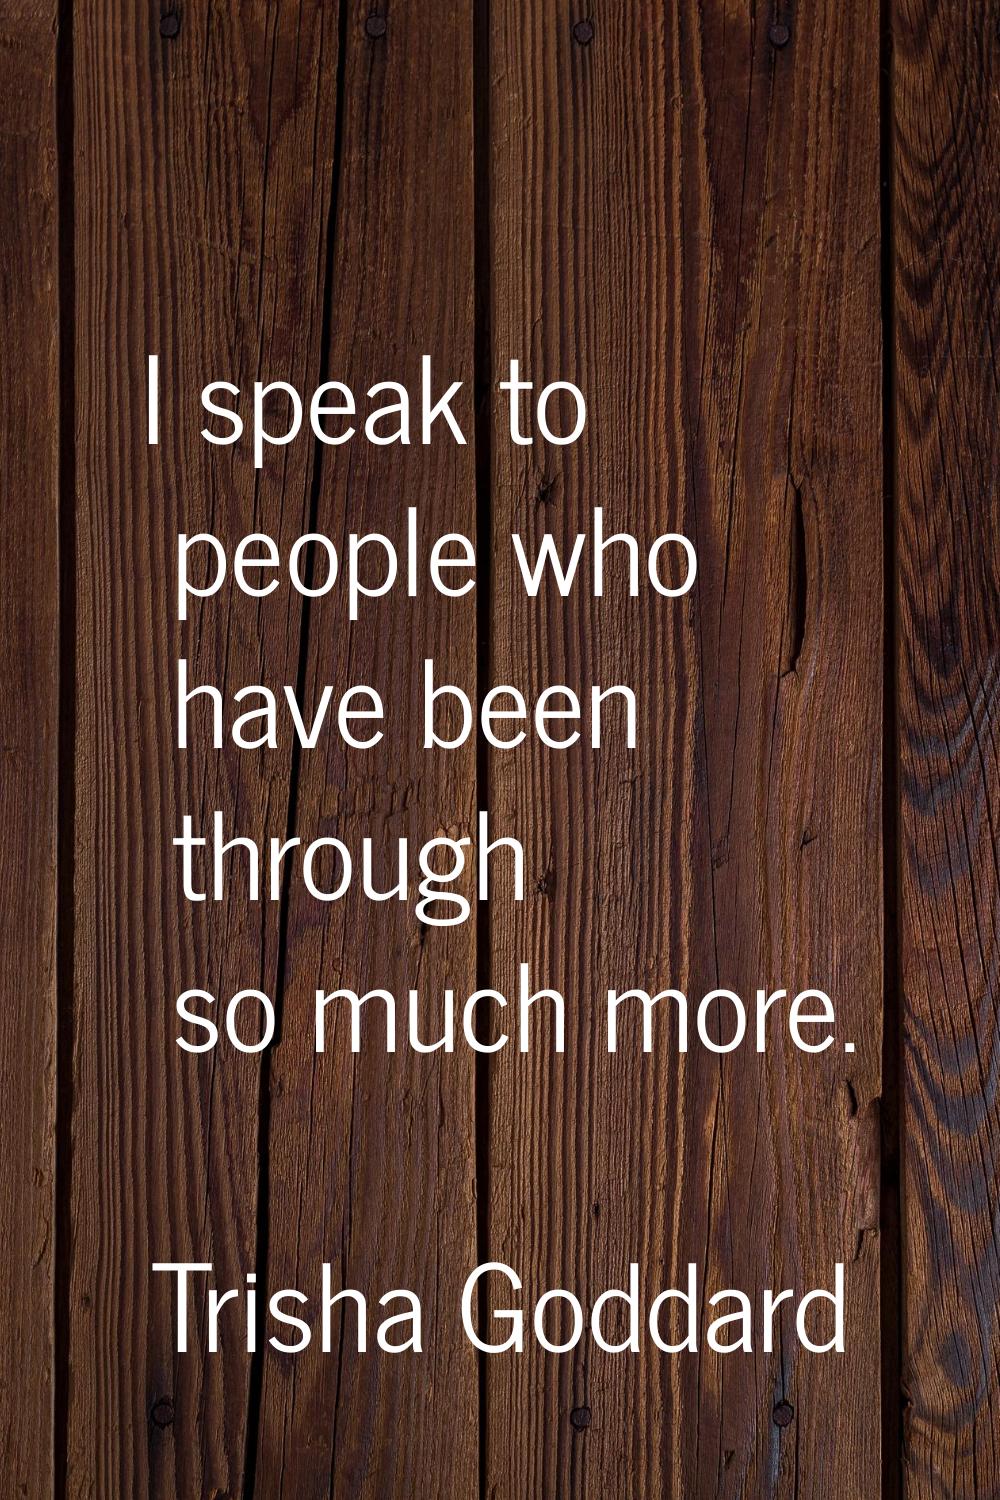 I speak to people who have been through so much more.